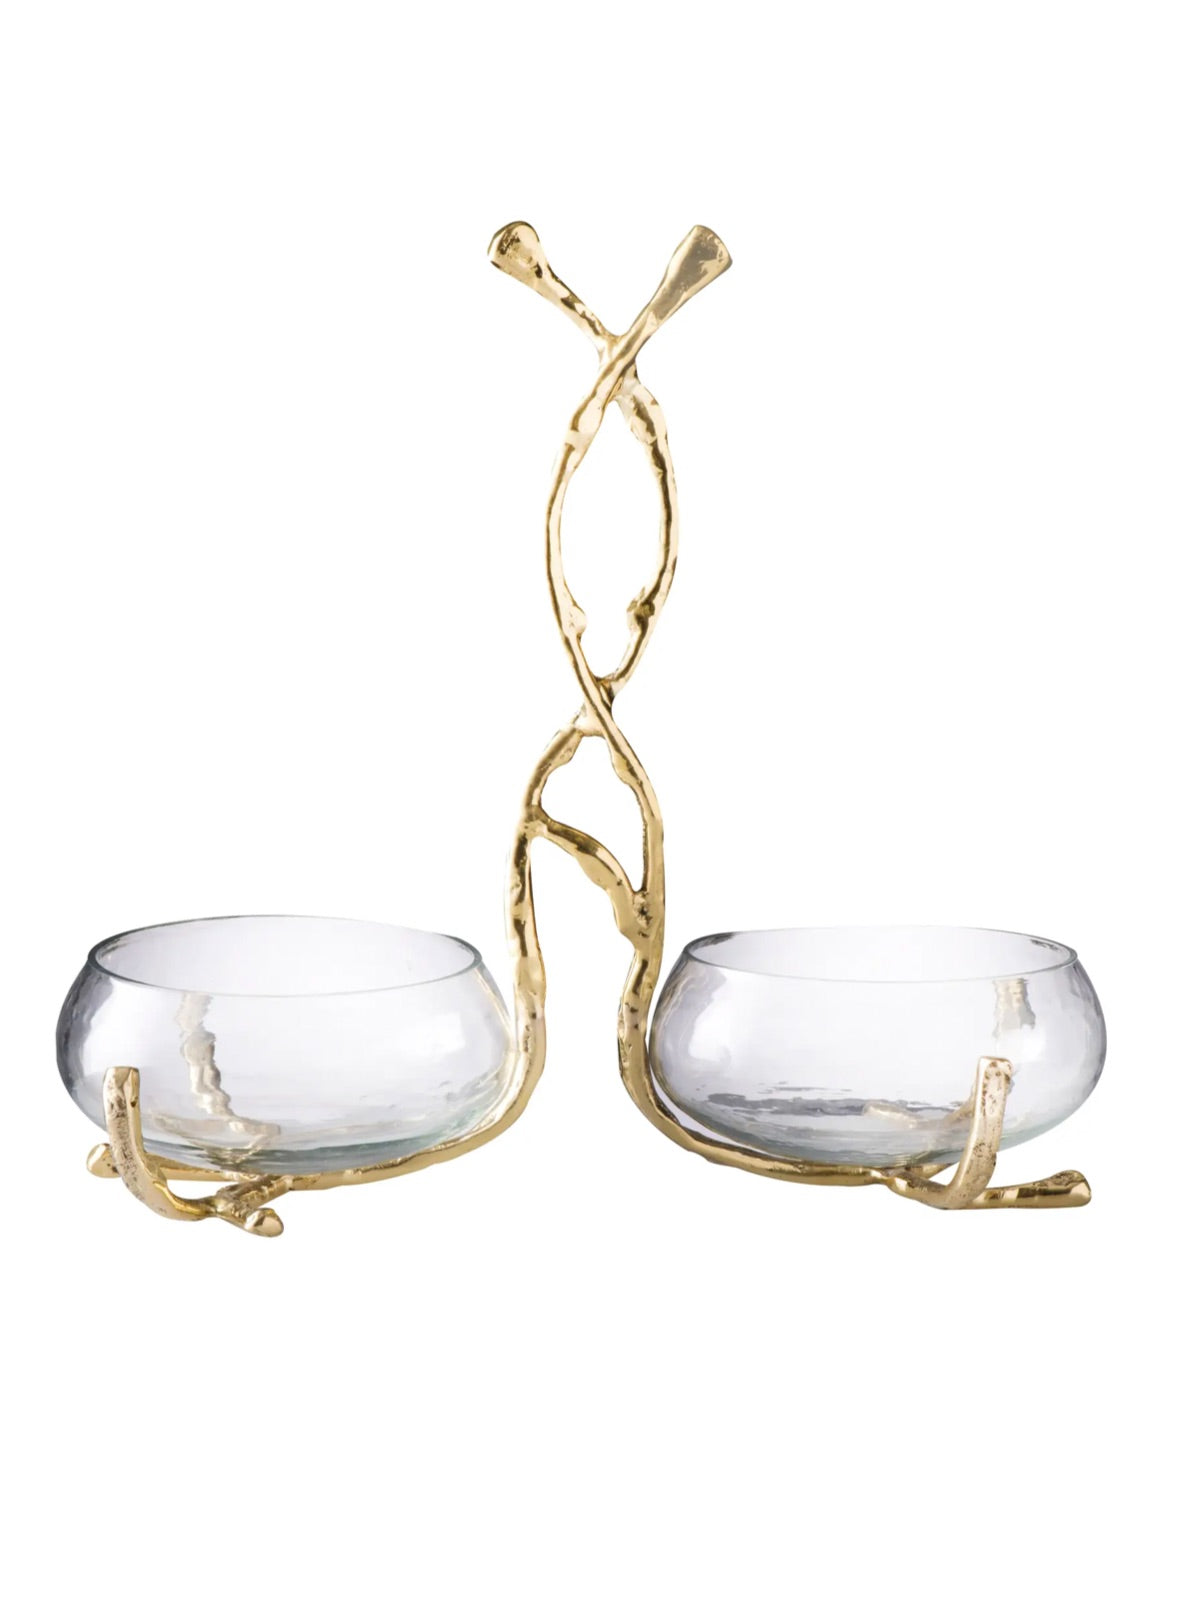 This magnificent 9in Relish Dish brings an extra aura to every display setting with hammered glass bowls and glossy gold twigs beautifying and lending elegance to the set. Sold by KYA Home Decor